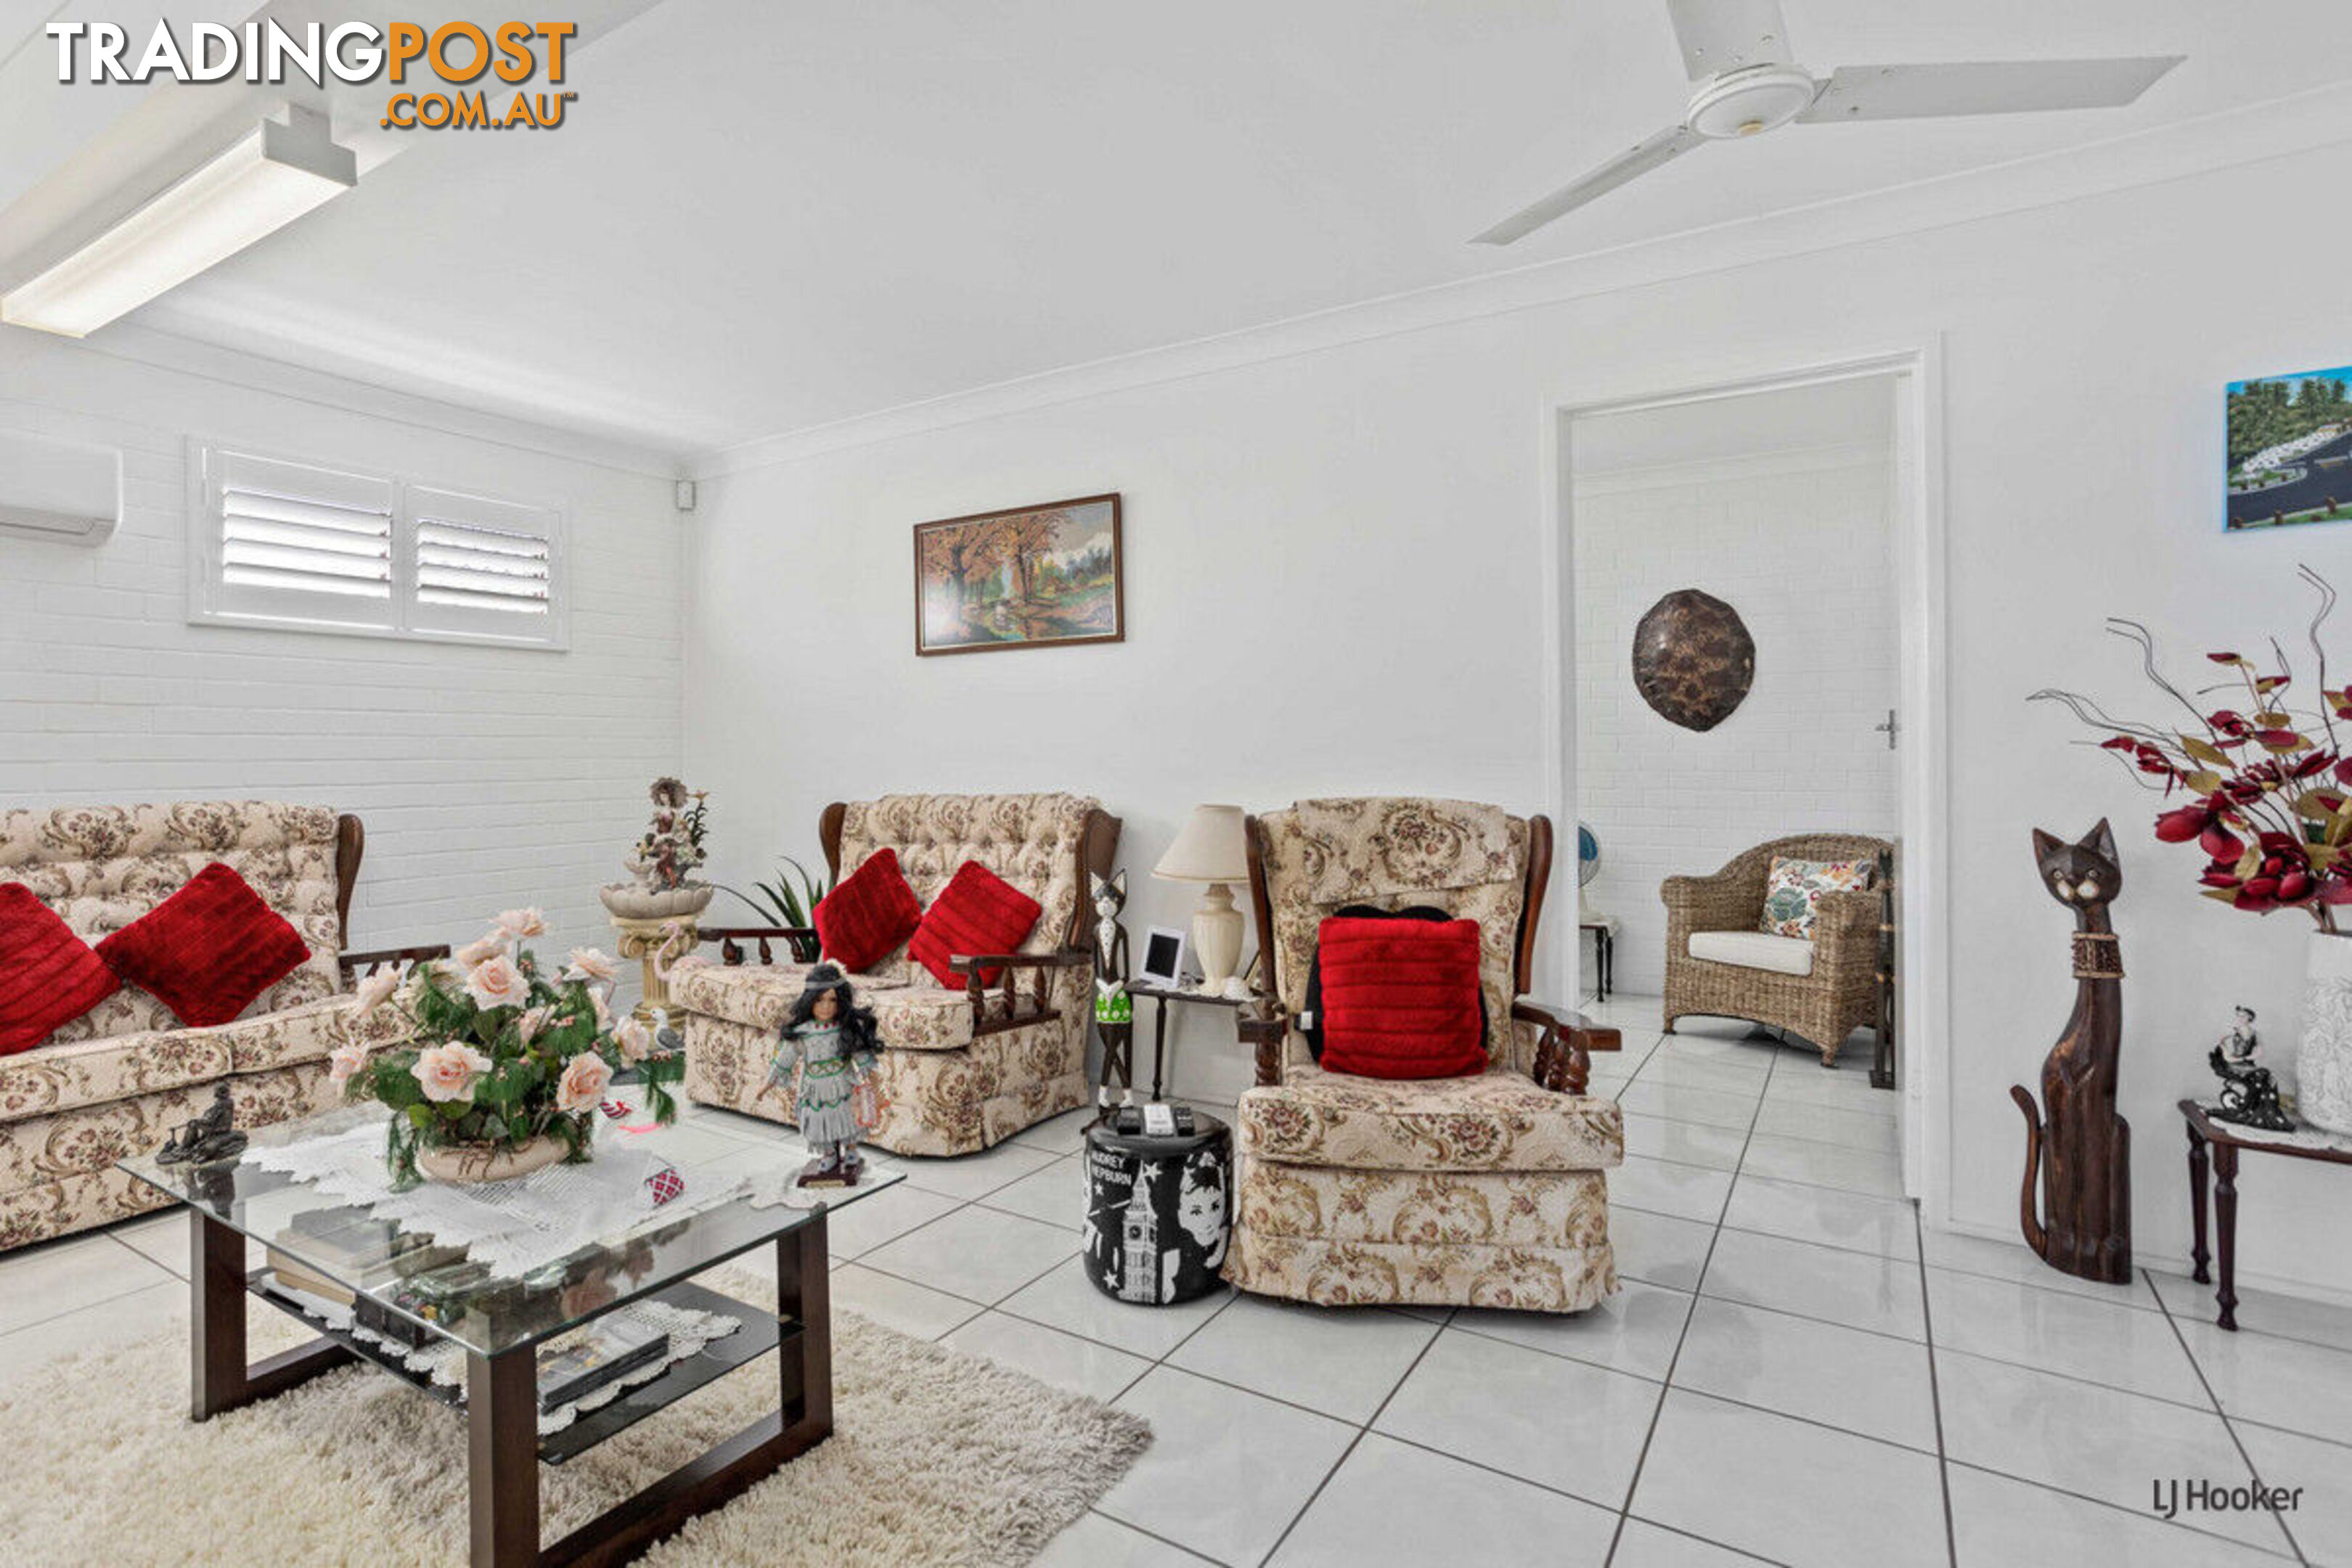 13 Egret Avenue BURLEIGH WATERS QLD 4220